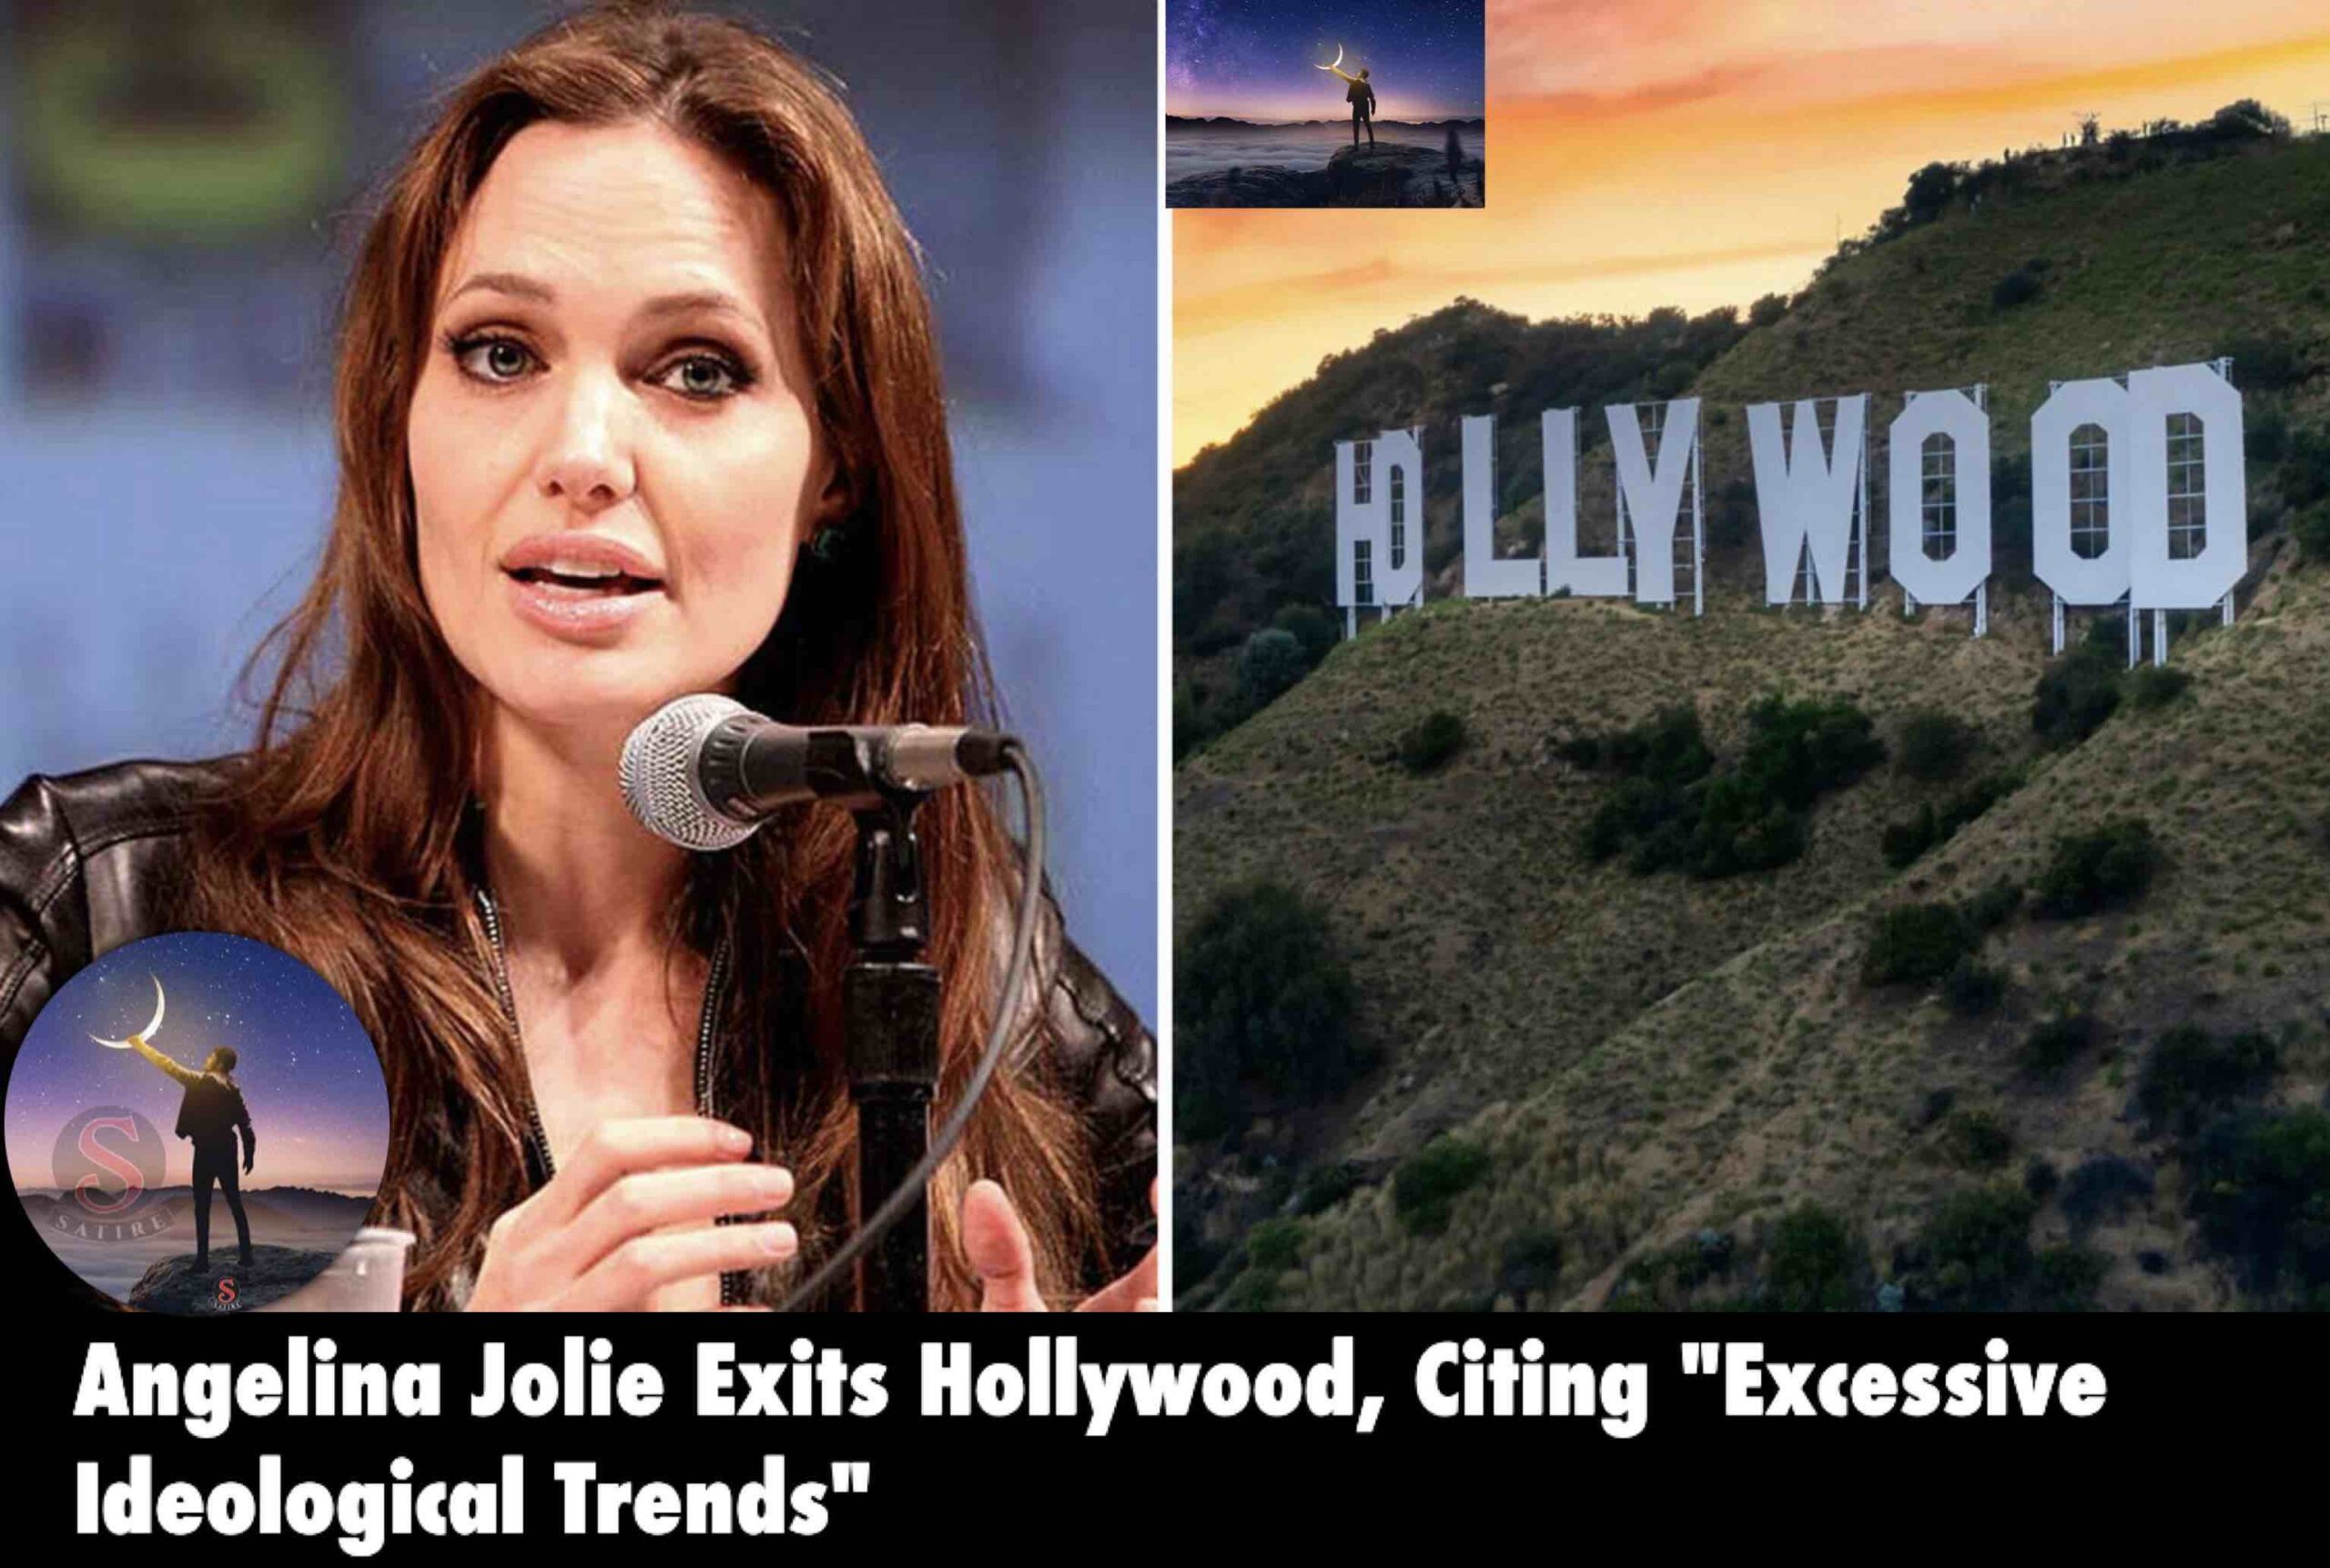 Angelina Jolie Exits Hollywood, Citing “Excessive Ideological Trends”